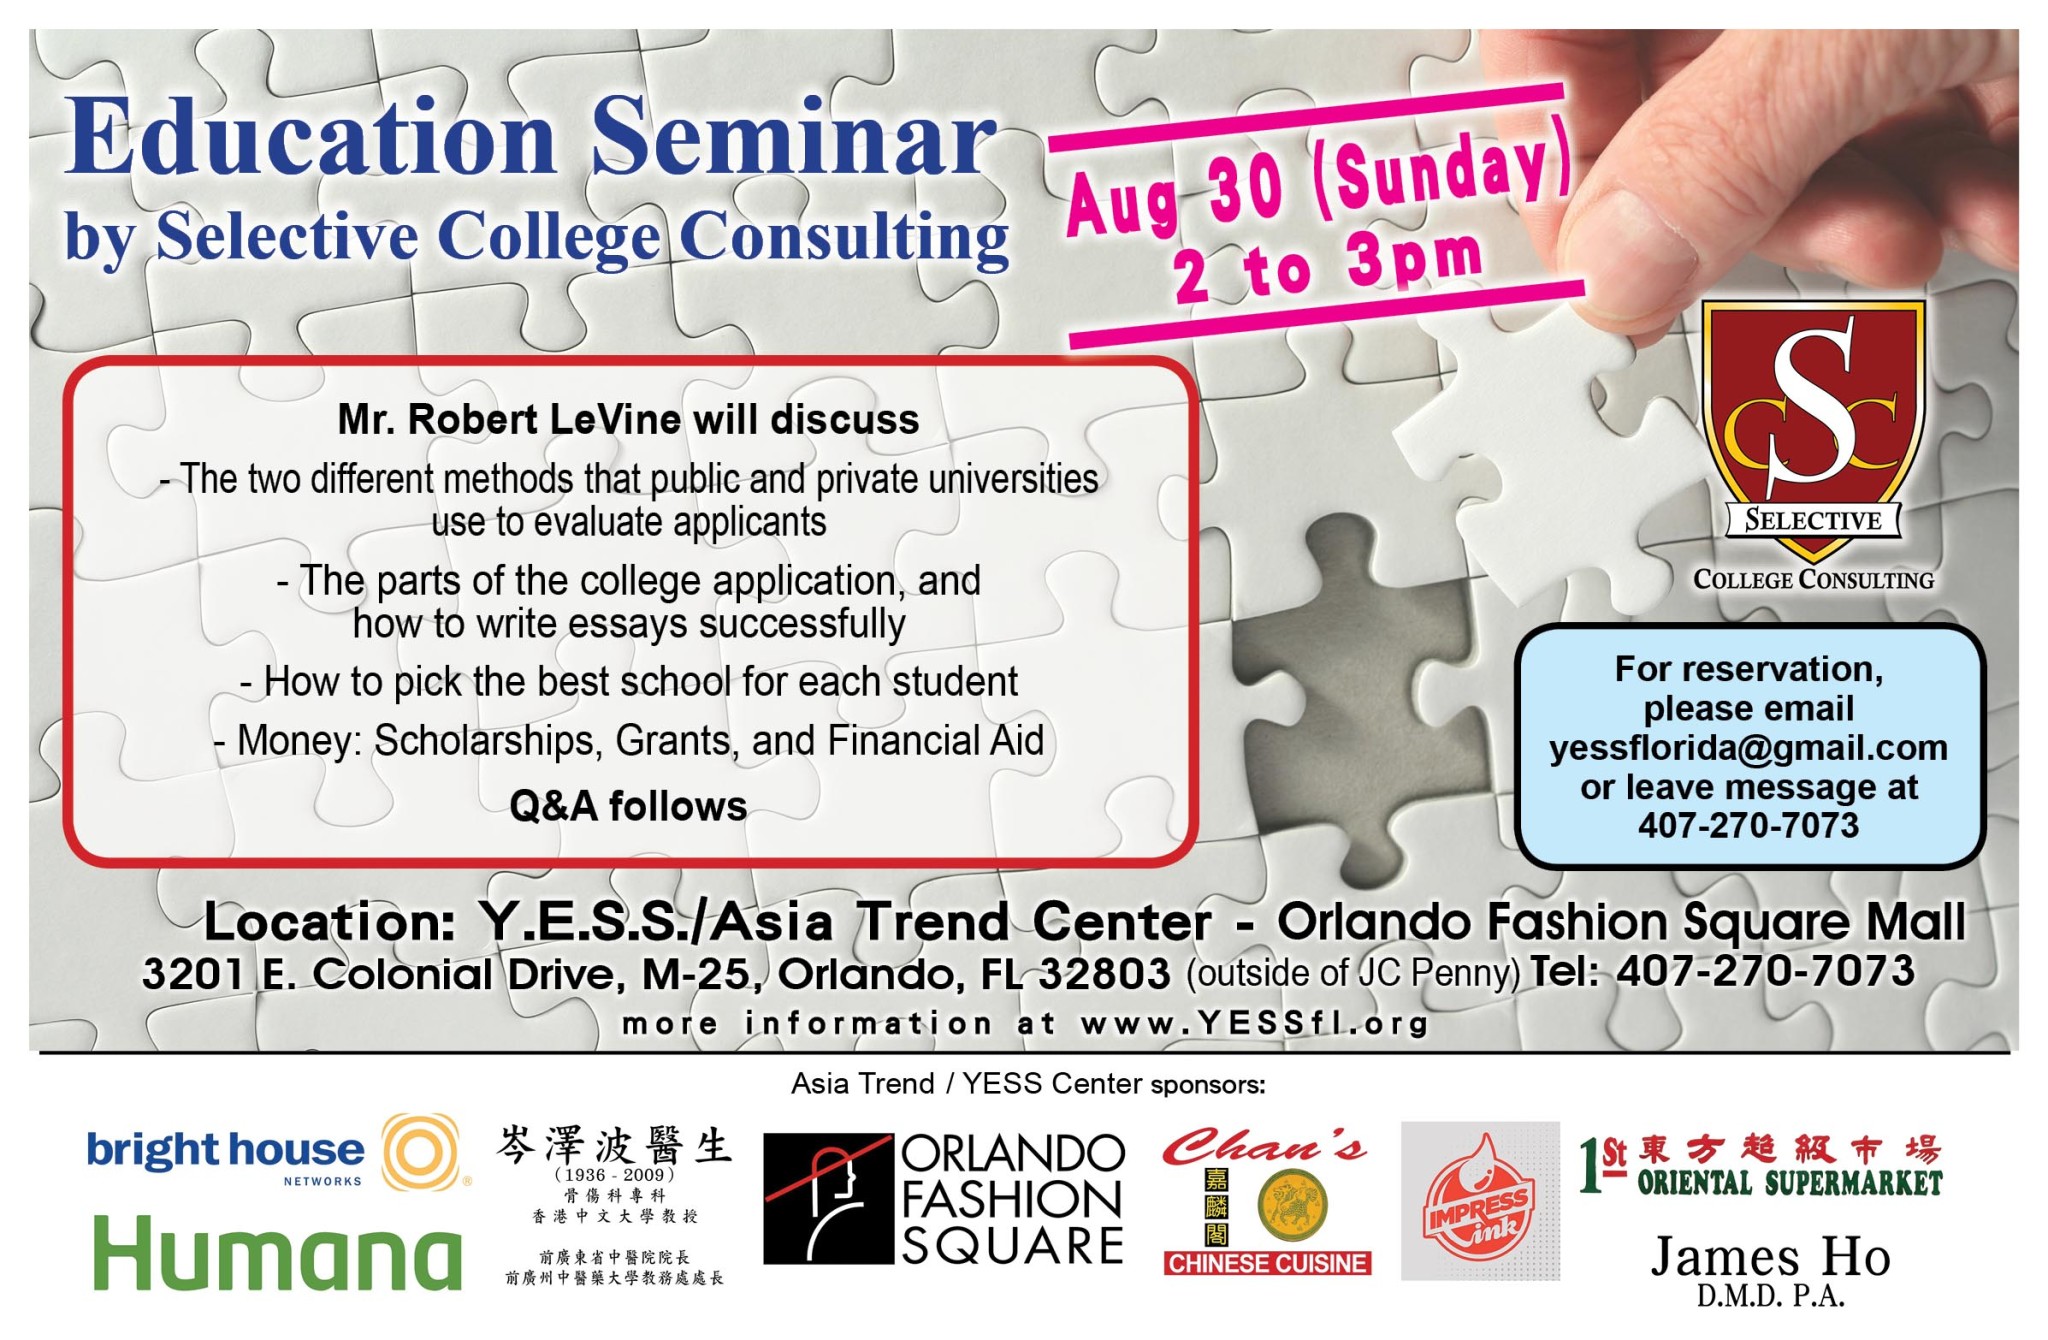 Education Seminar by Selective College Consulting